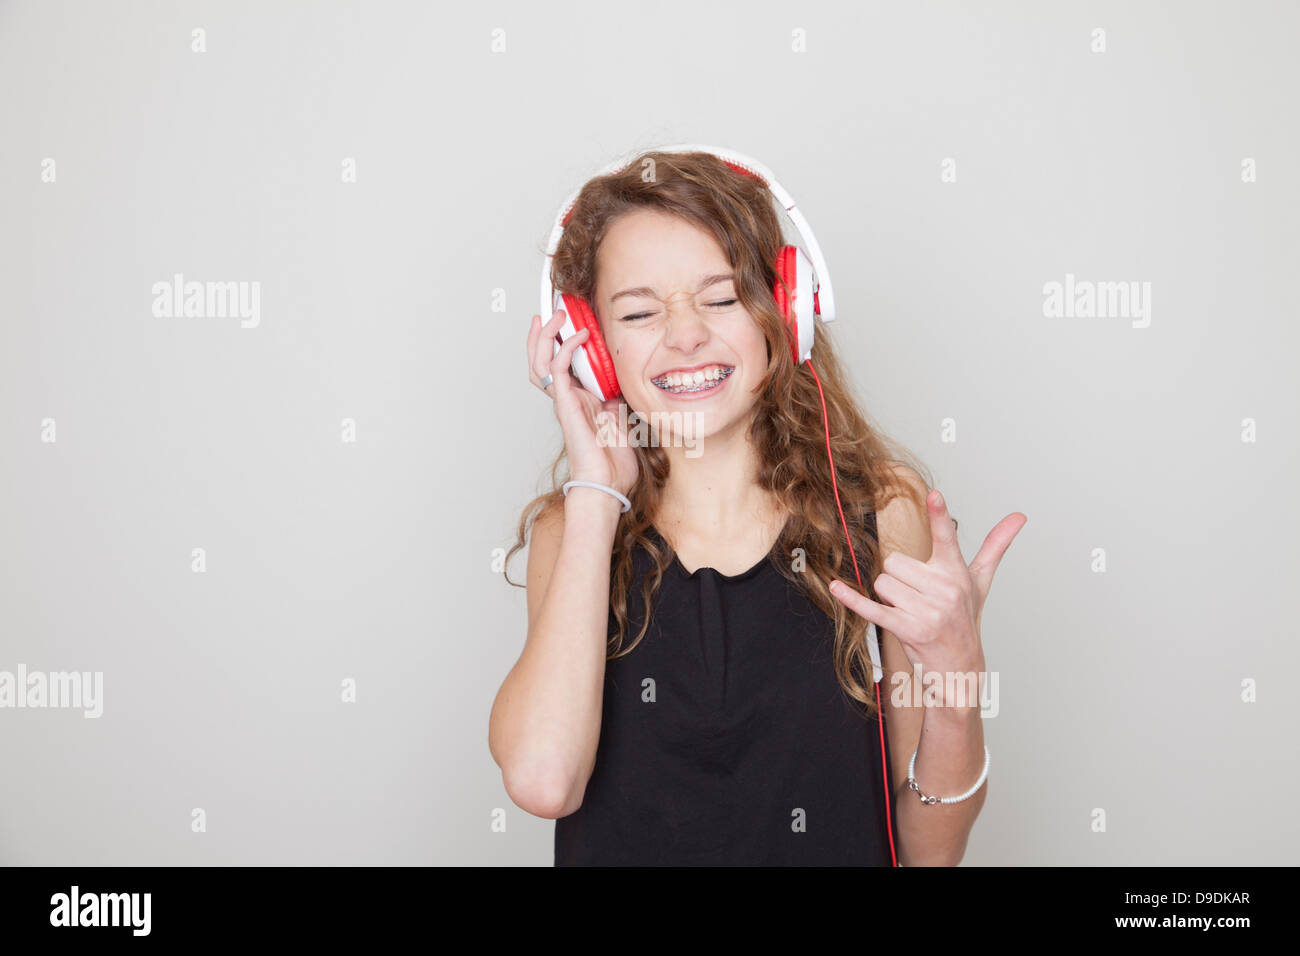 Girl wearing headphones with eyes closed Stock Photo